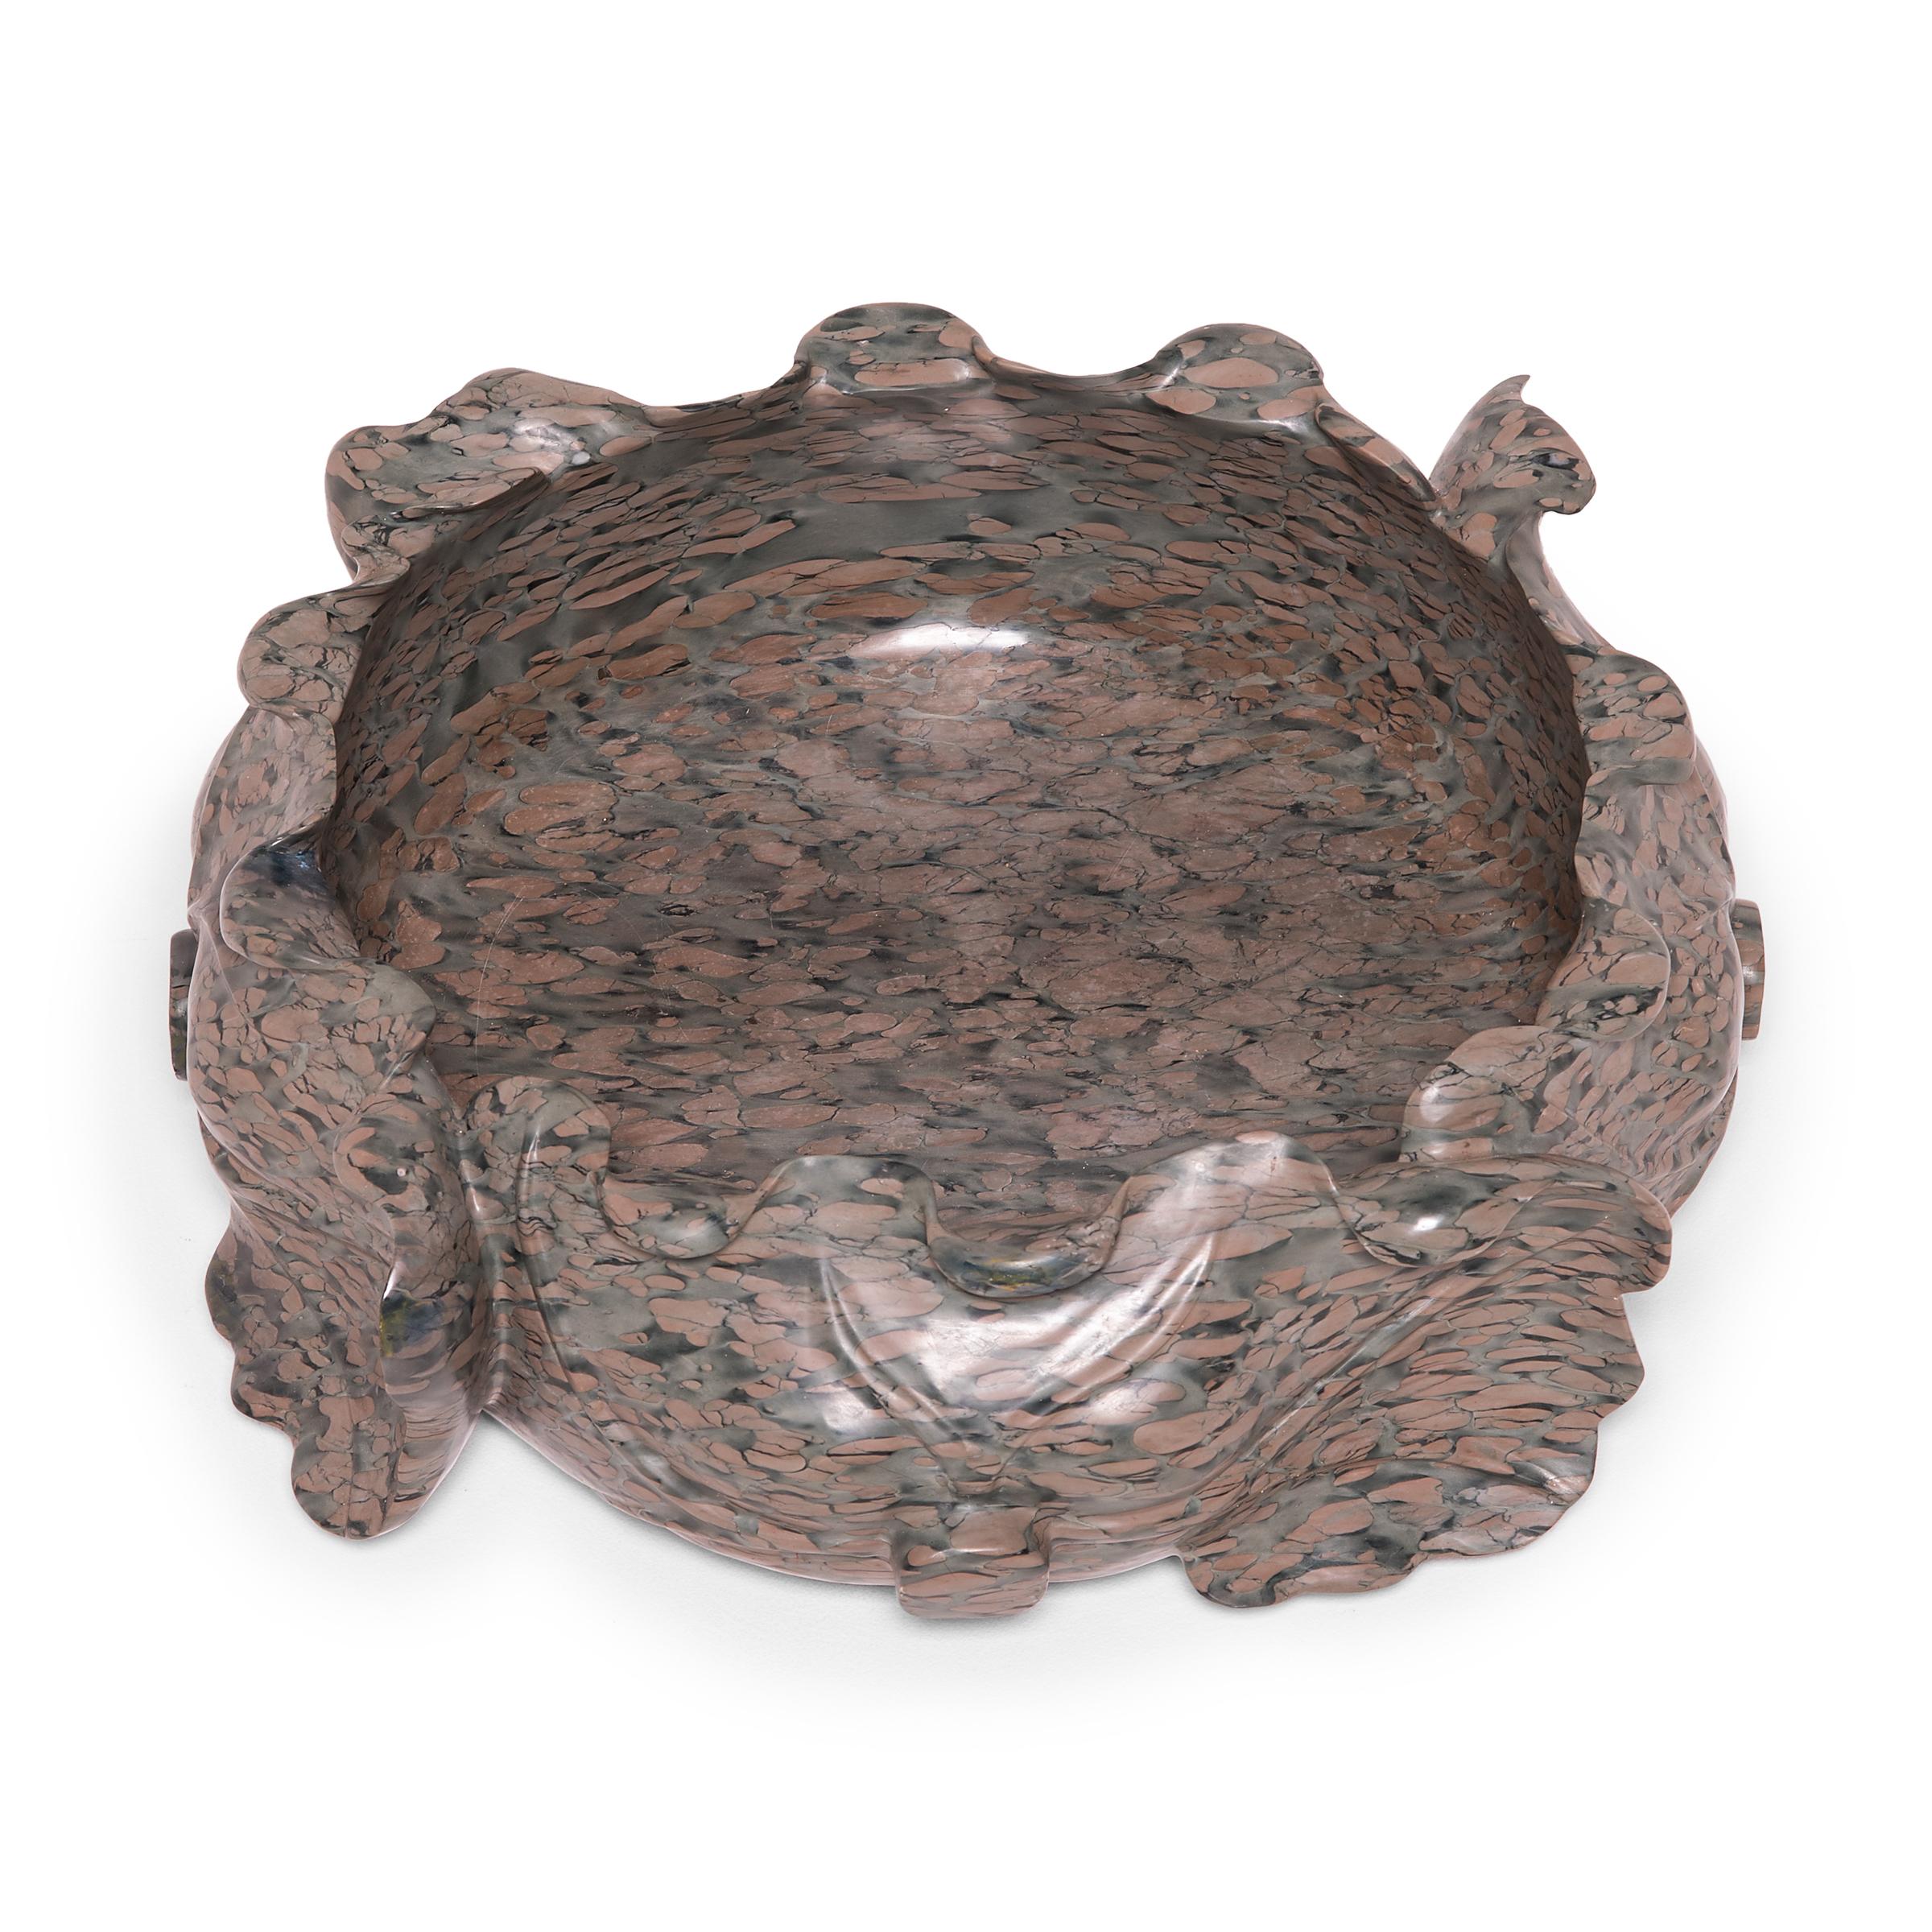 Hand carved of mesmerizing zhenzhu, this contemporary stone basin evokes the graceful shape of a traditional lotus flower. Shaped with undulating curves, the container has the look of freeform pottery. Exploiting the stone’s conglomerate nature to